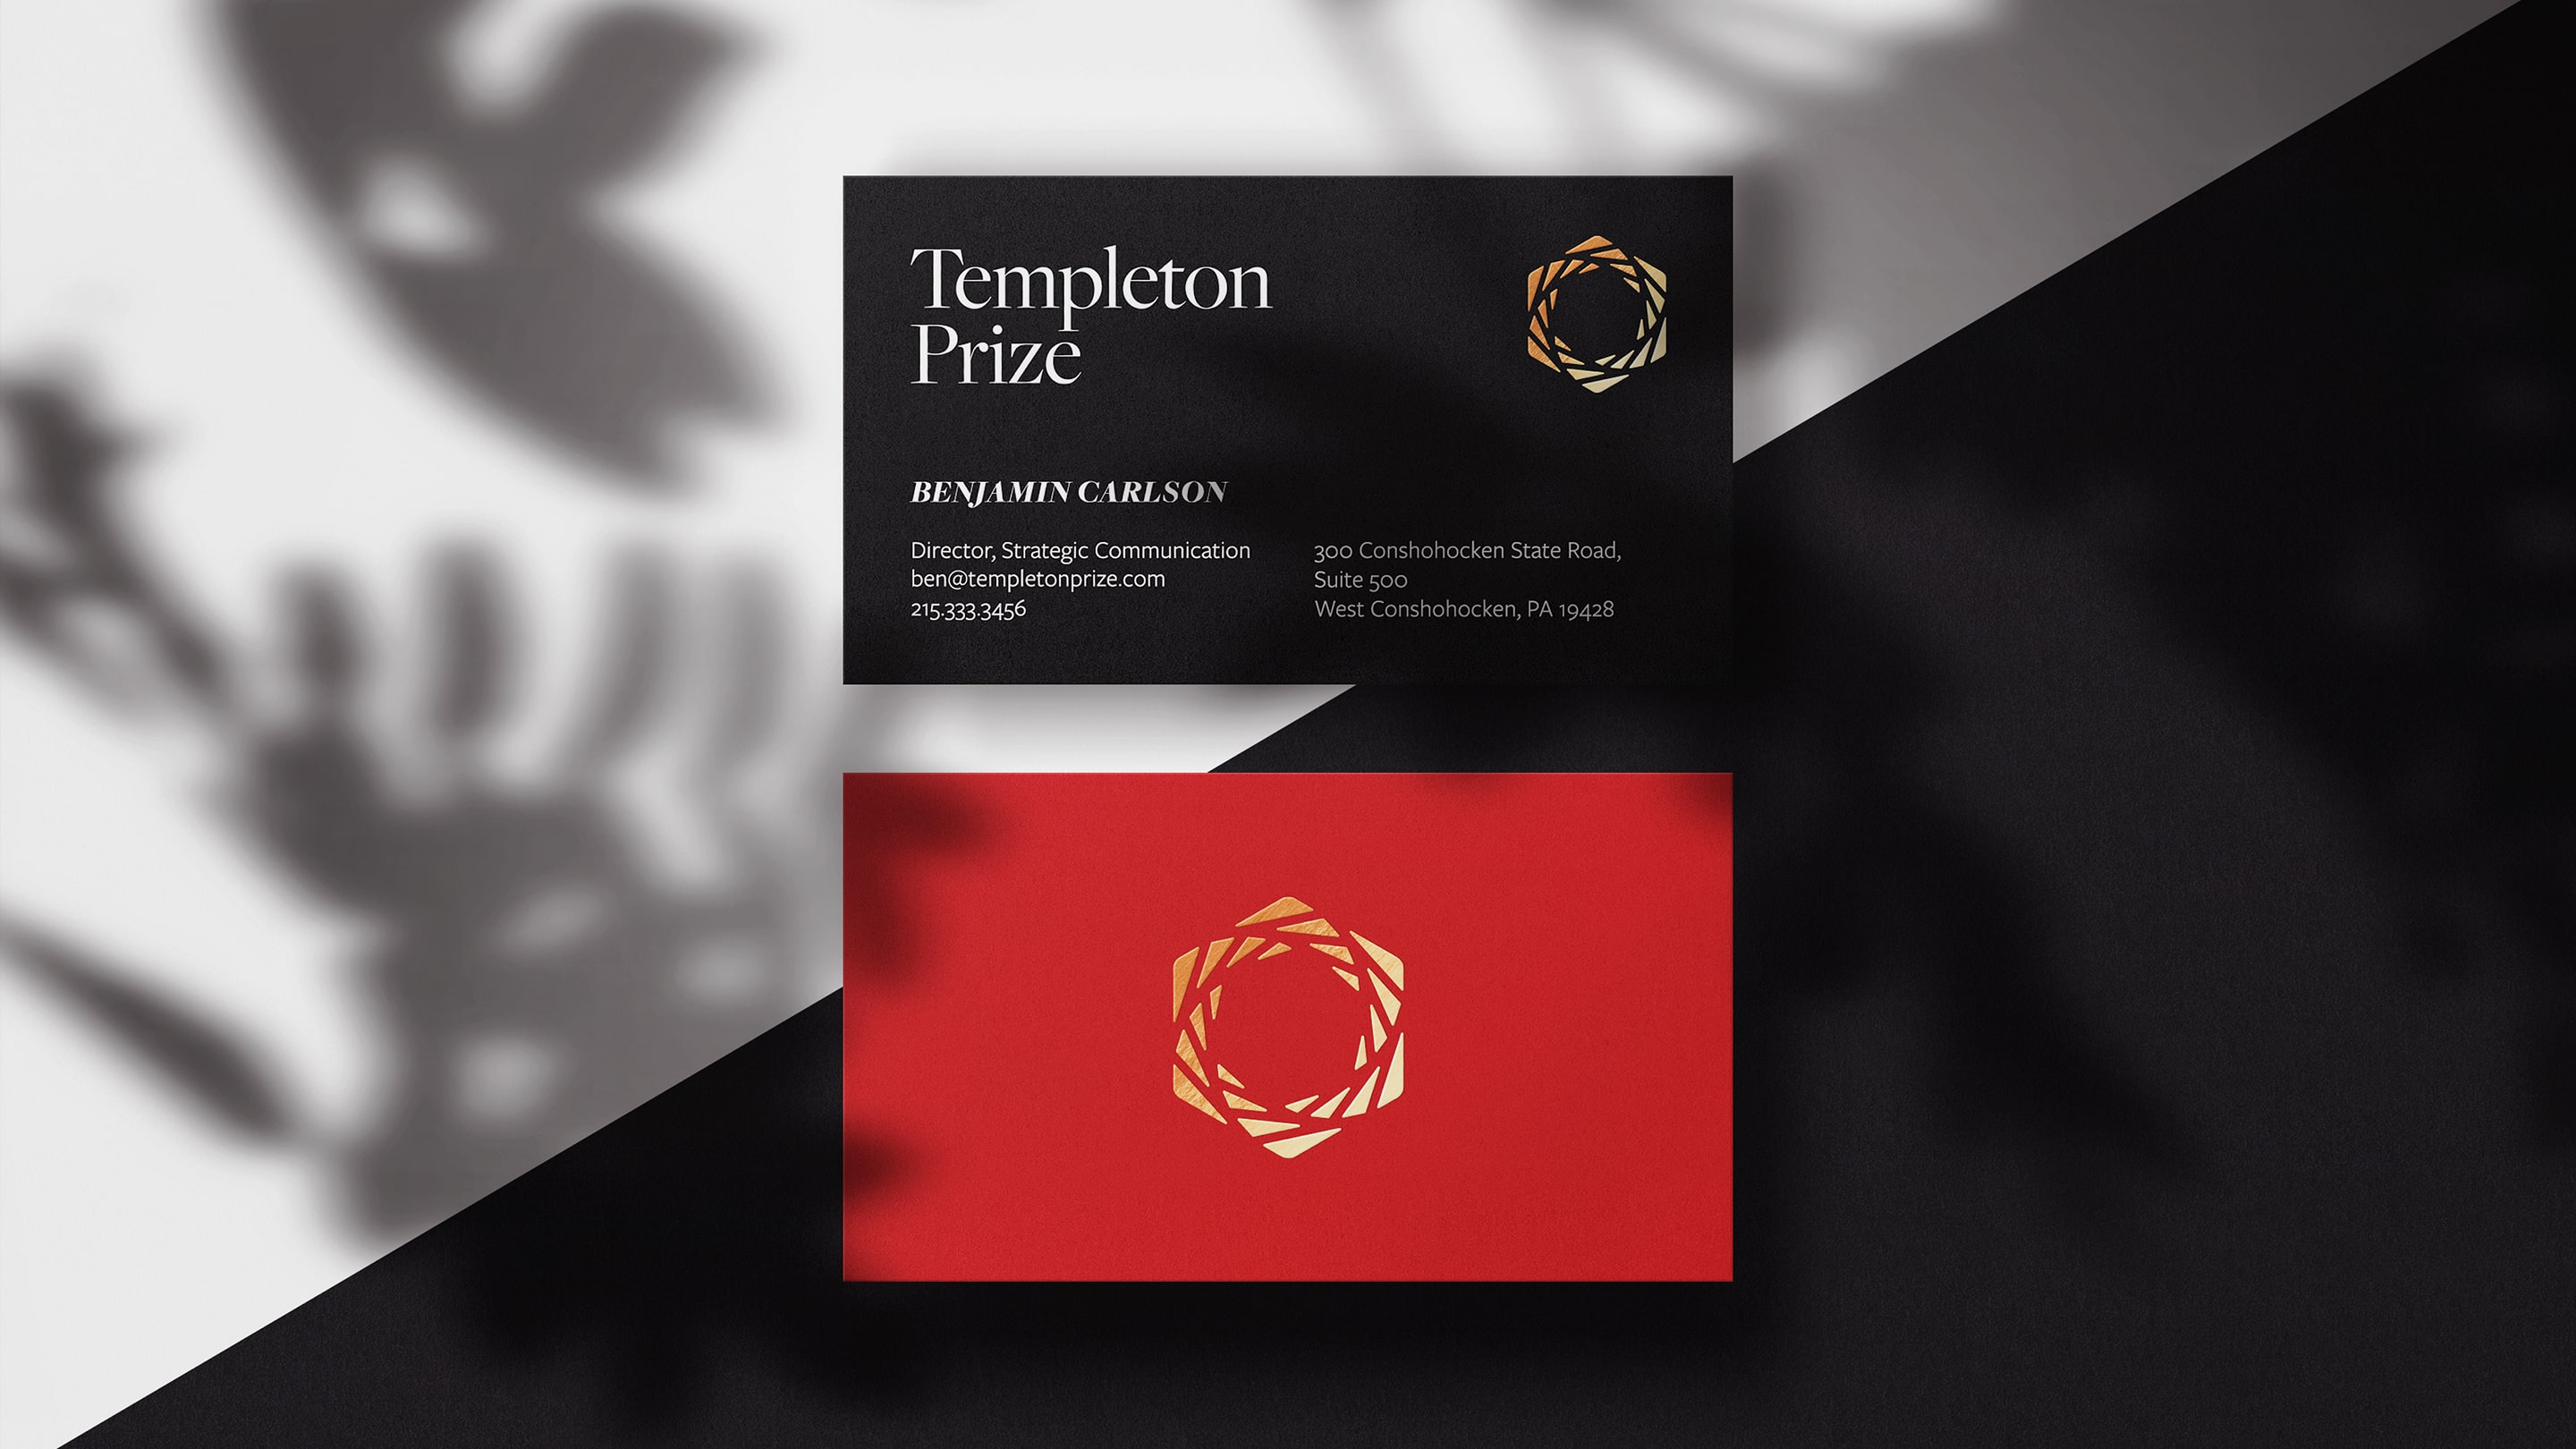 Business card design for mission-based organization corporate identity